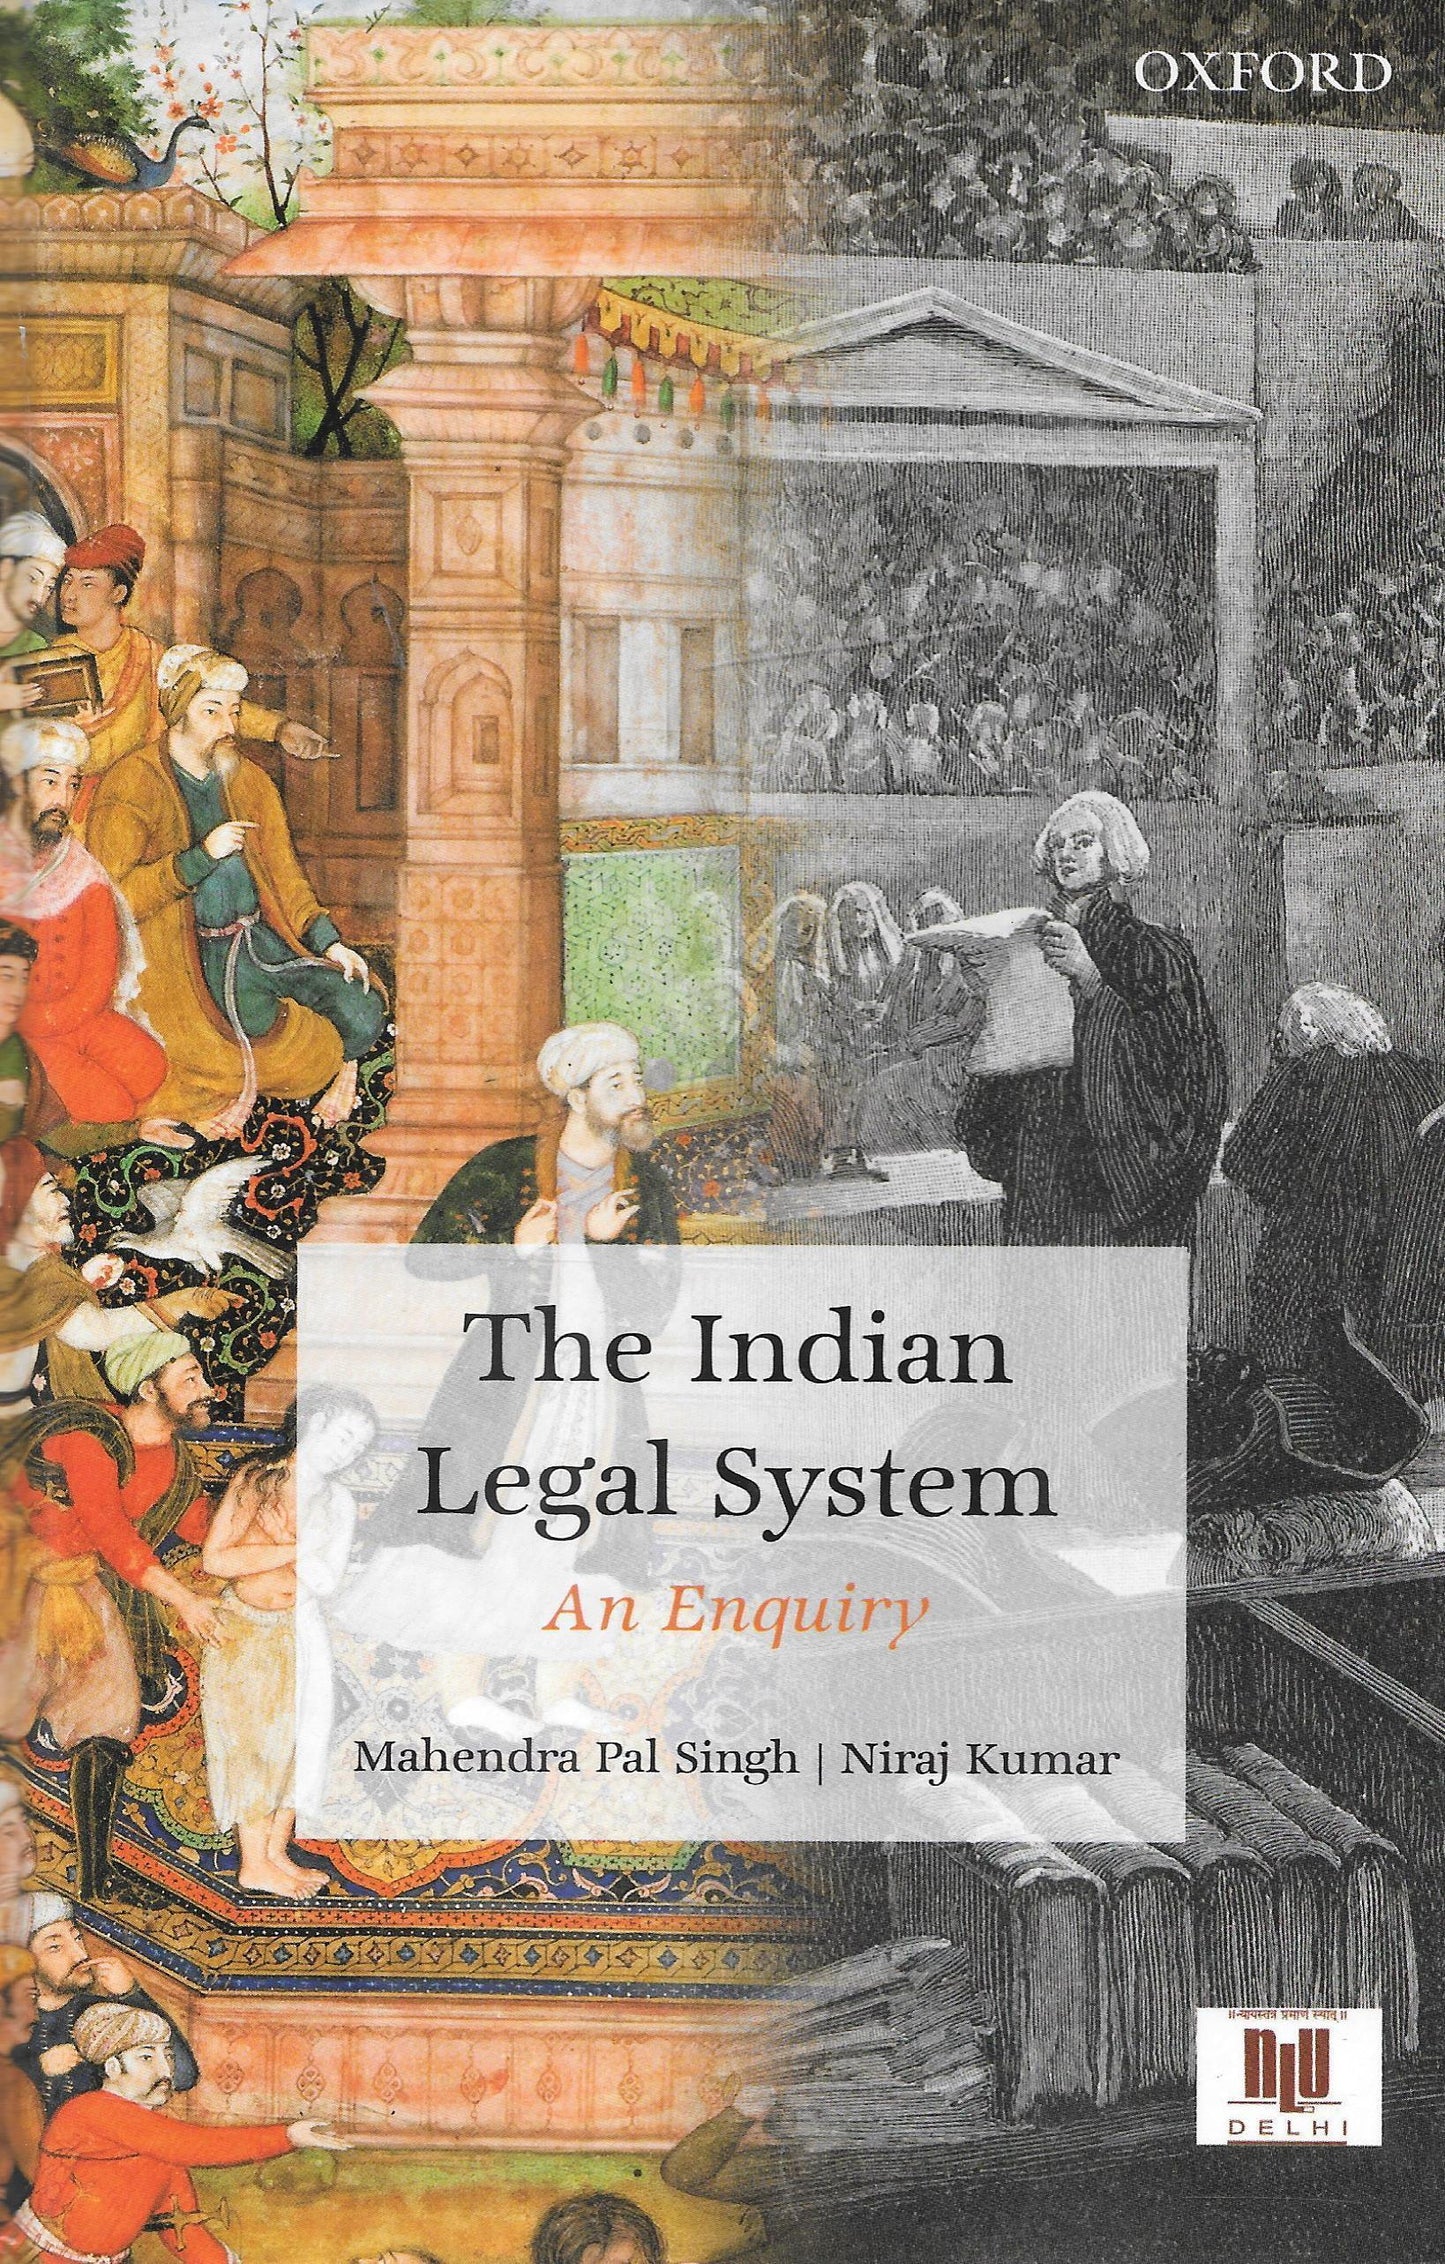 The Indian Legal System